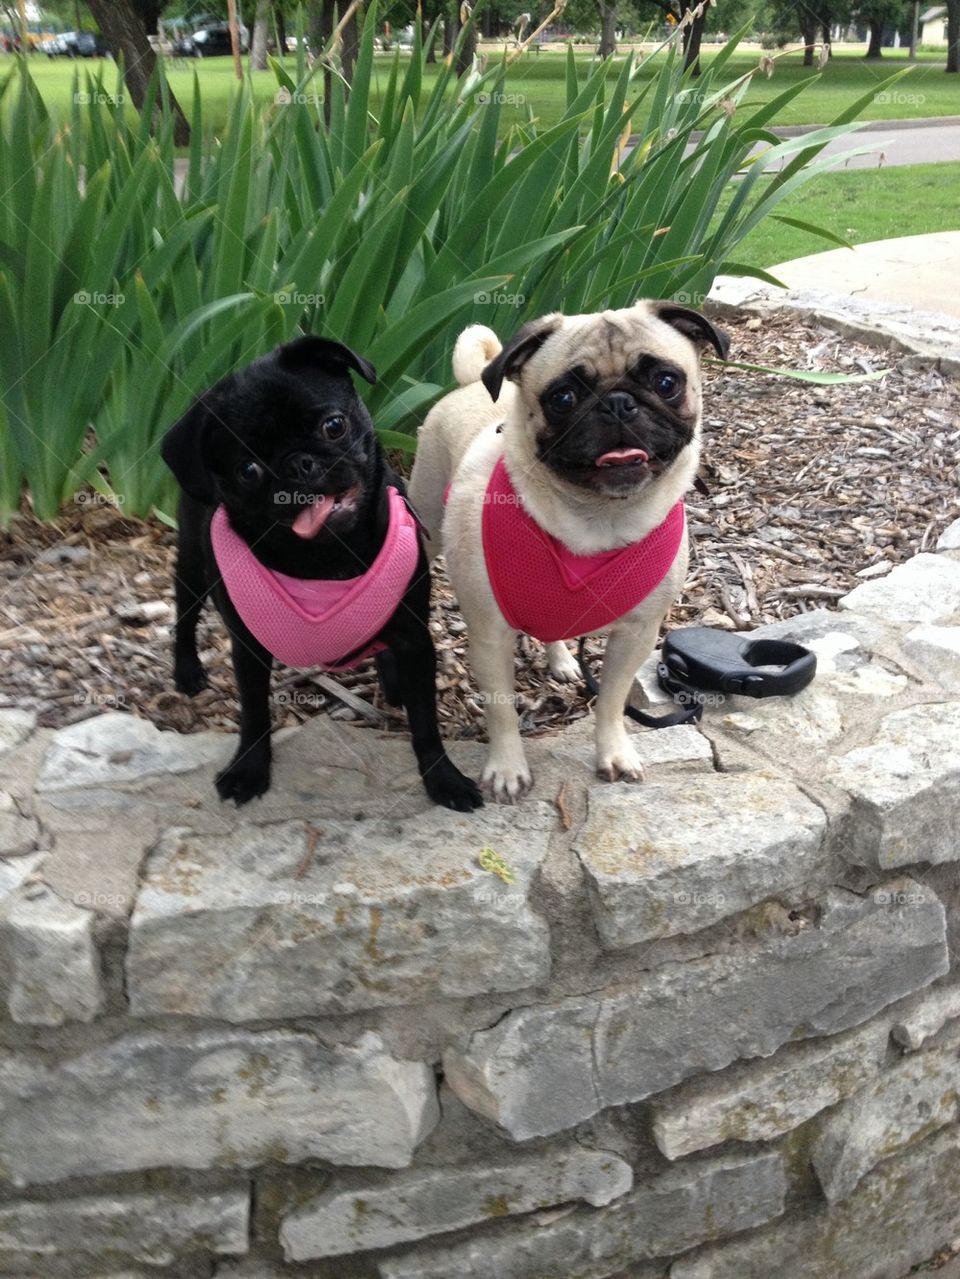 Pugs at the park